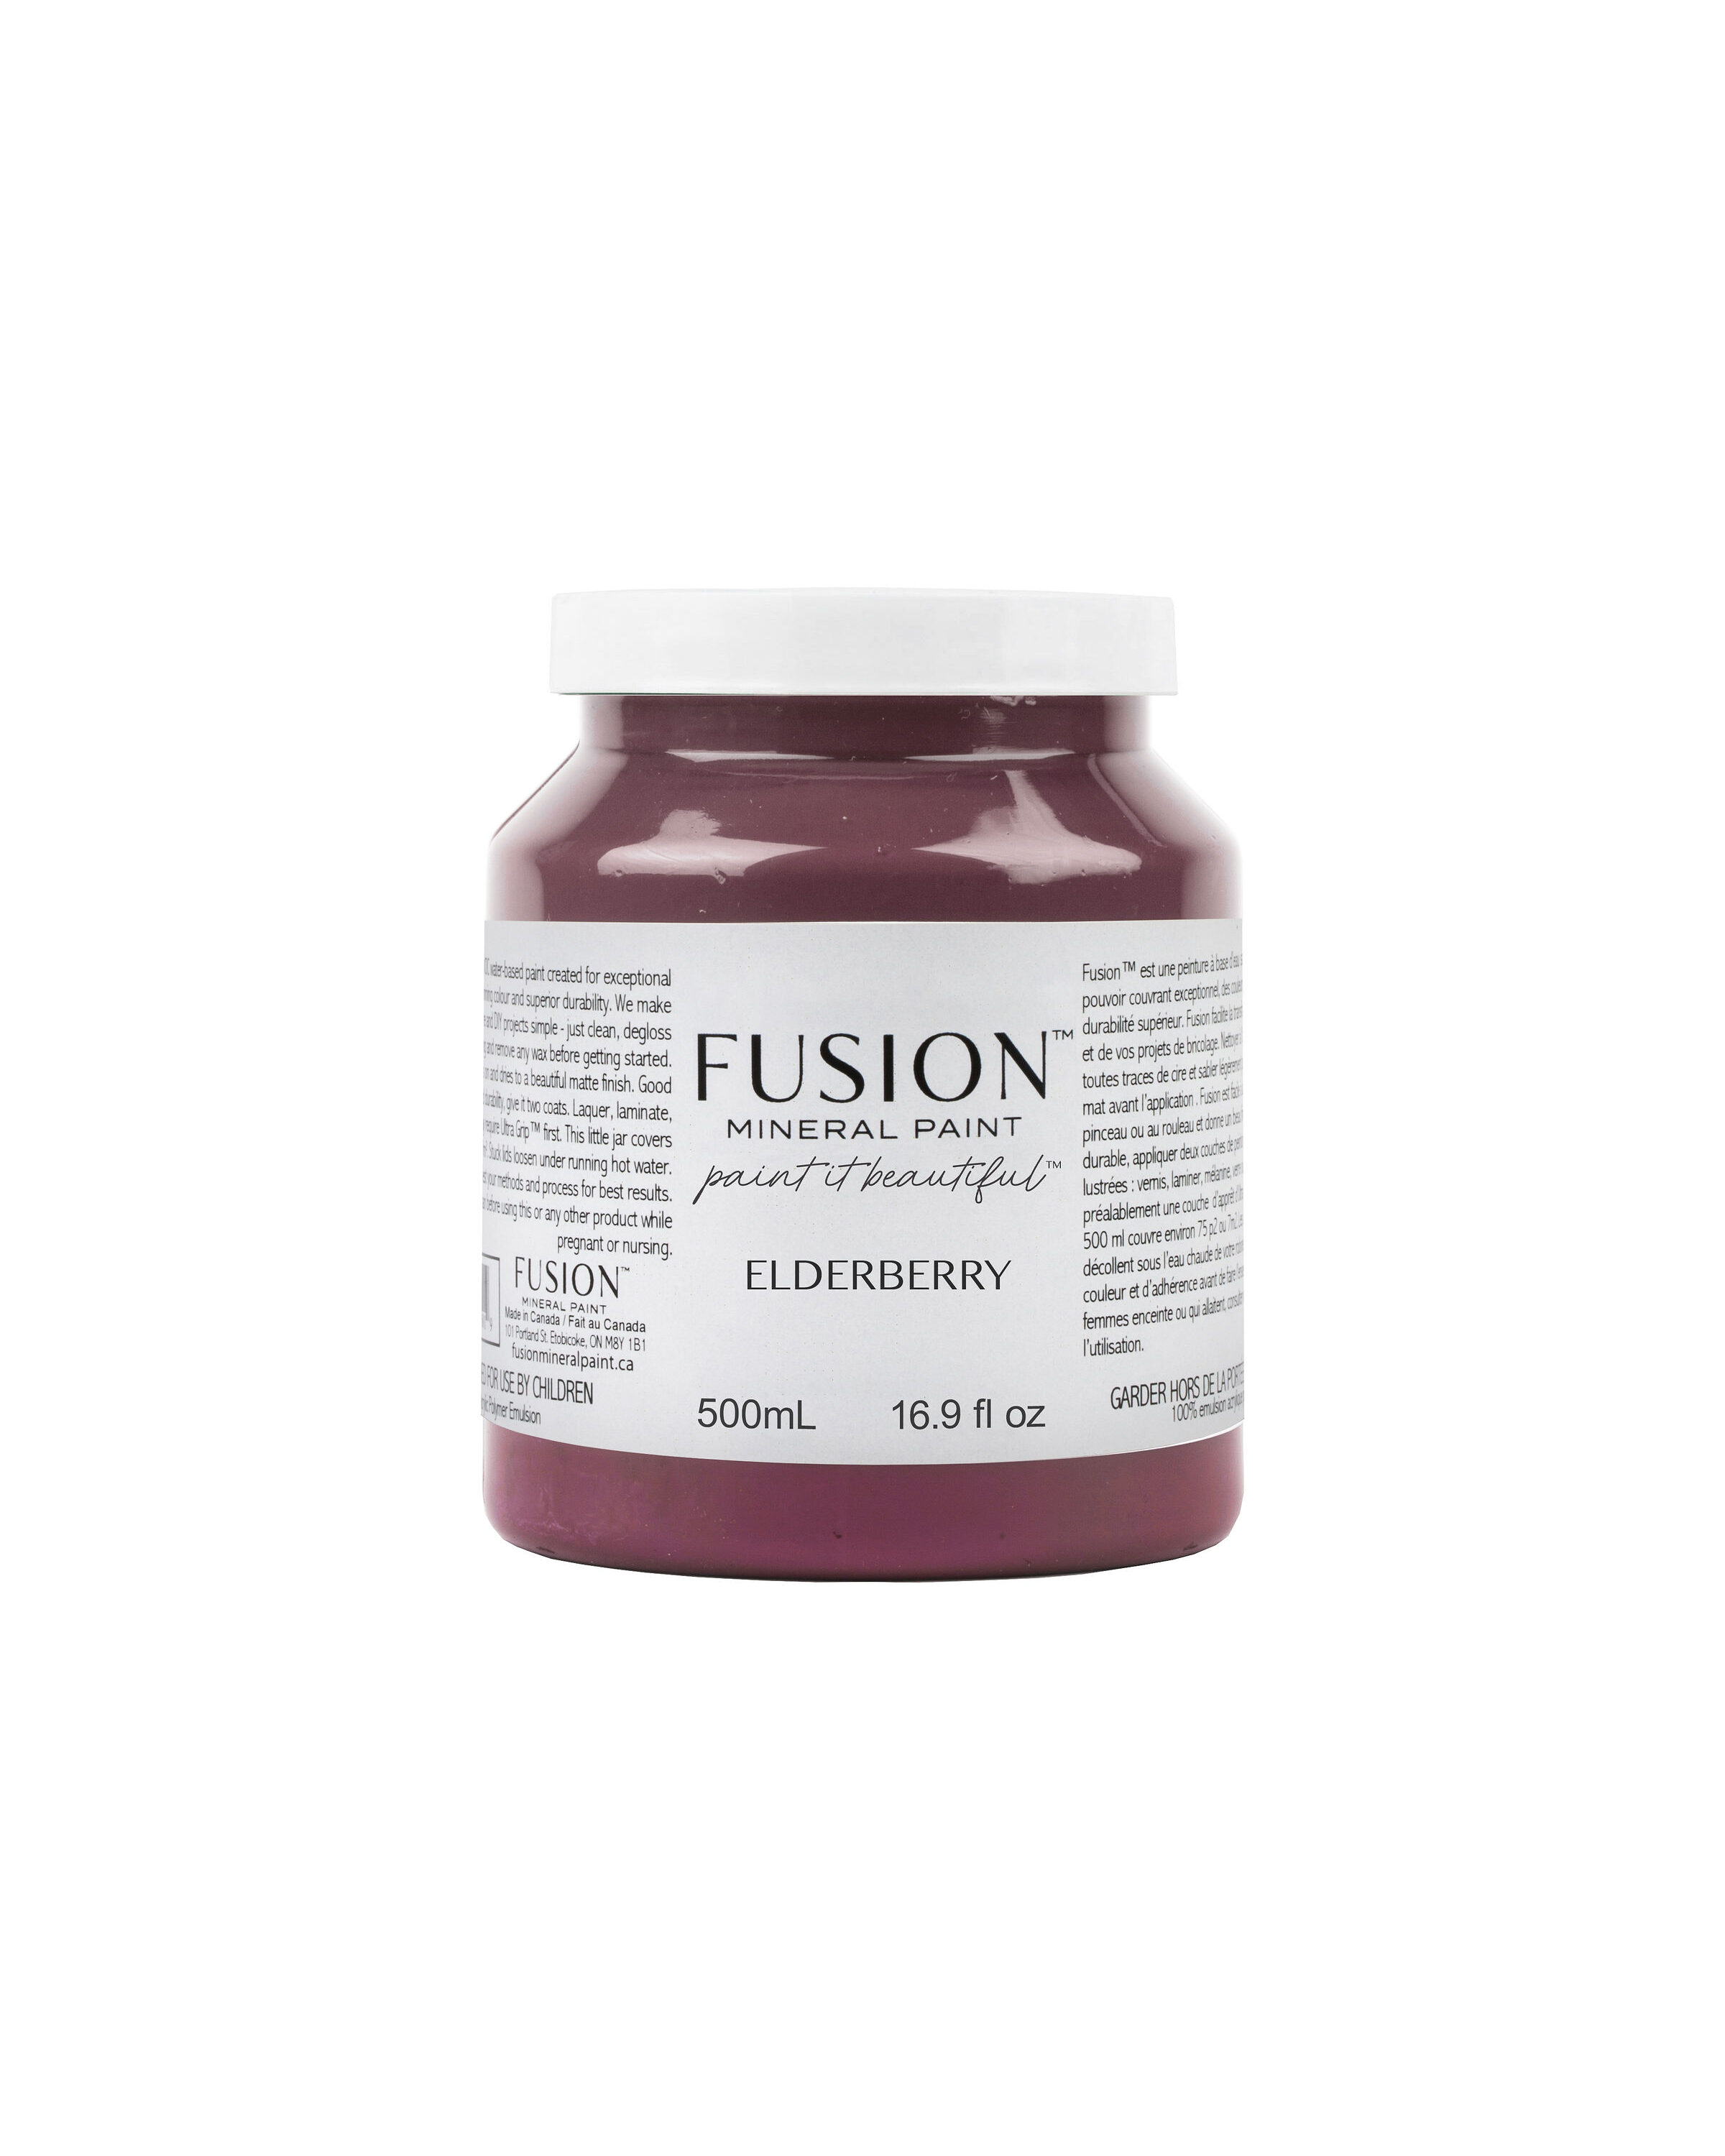 Fusion Mineral Paint vernice ecologica color fragola